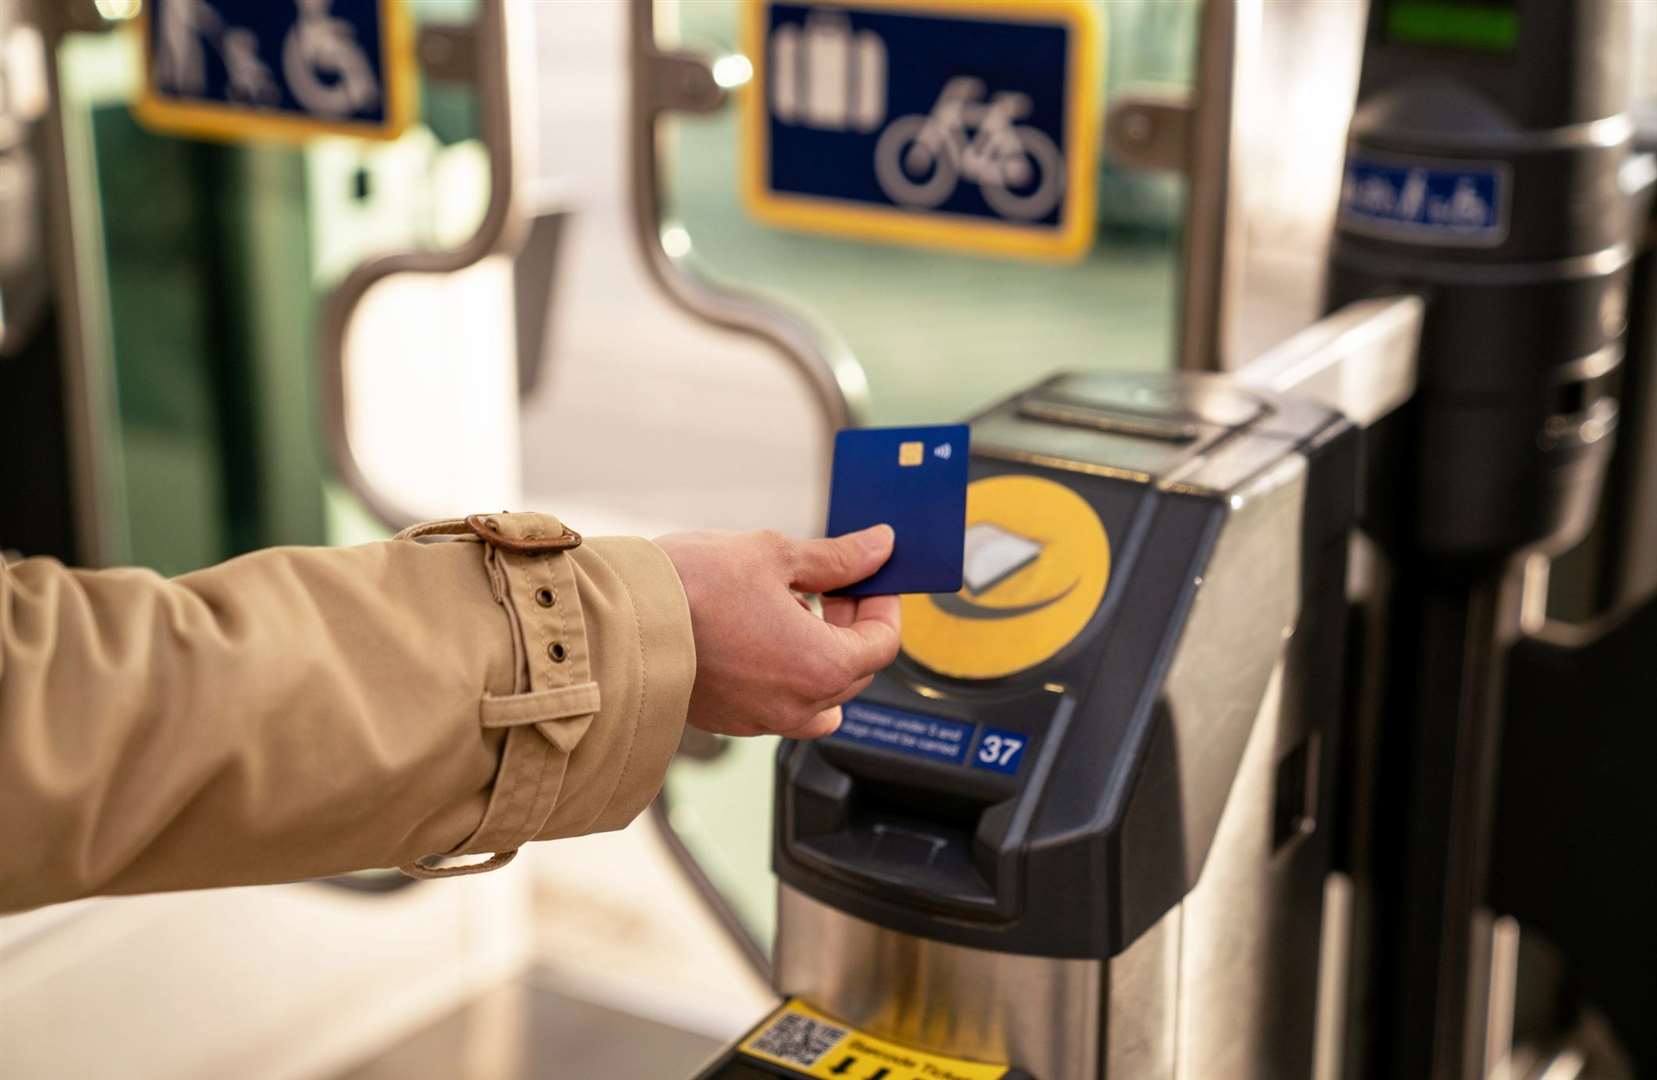 Tap-in tap-out technology is being rolled out at several Kent stations. Picture: iStock